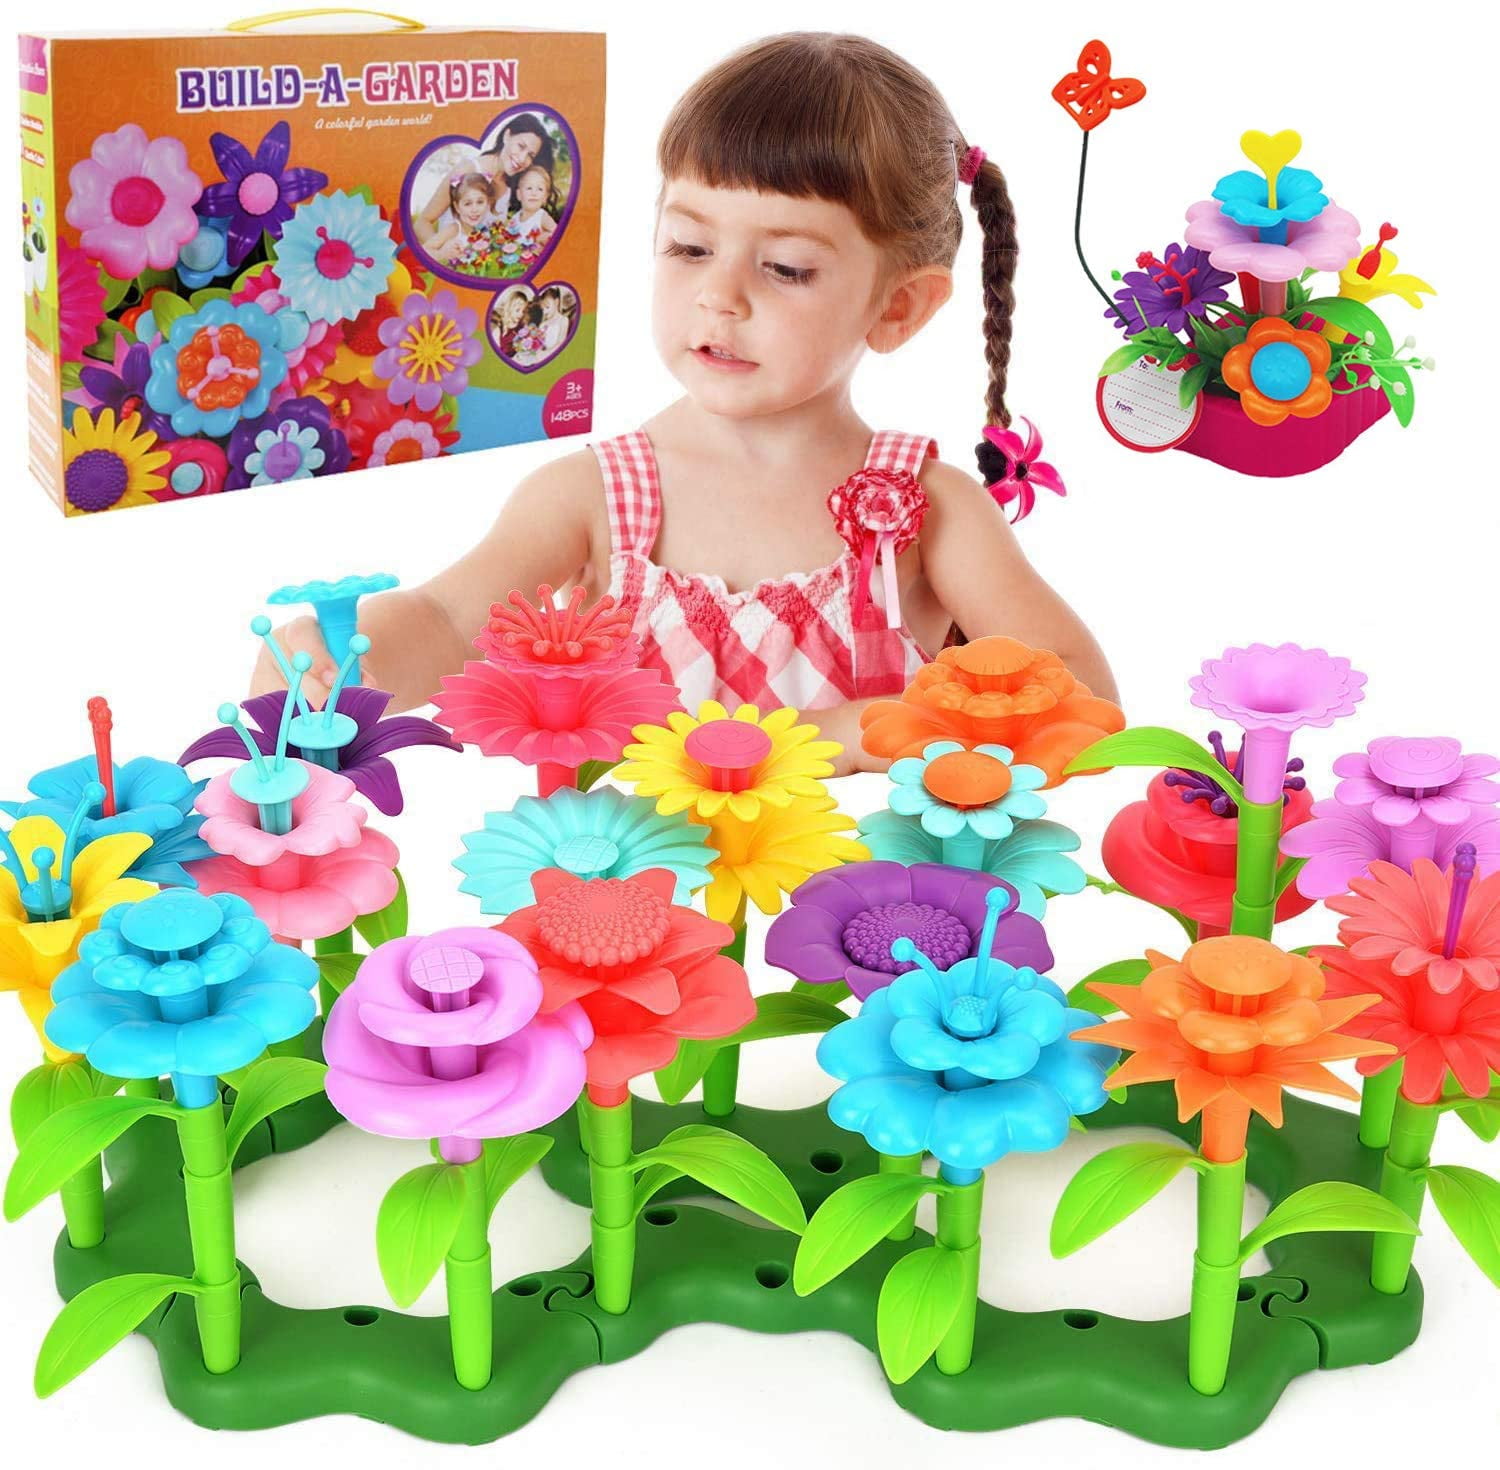 4 Build a Bouquet Floral Arrangement Playset for Toddlers and Kids Age 3 6 Year Old Girls Pretend Gardening Gifts Flower Garden Building Toys BIRANCO 5 120 PCS